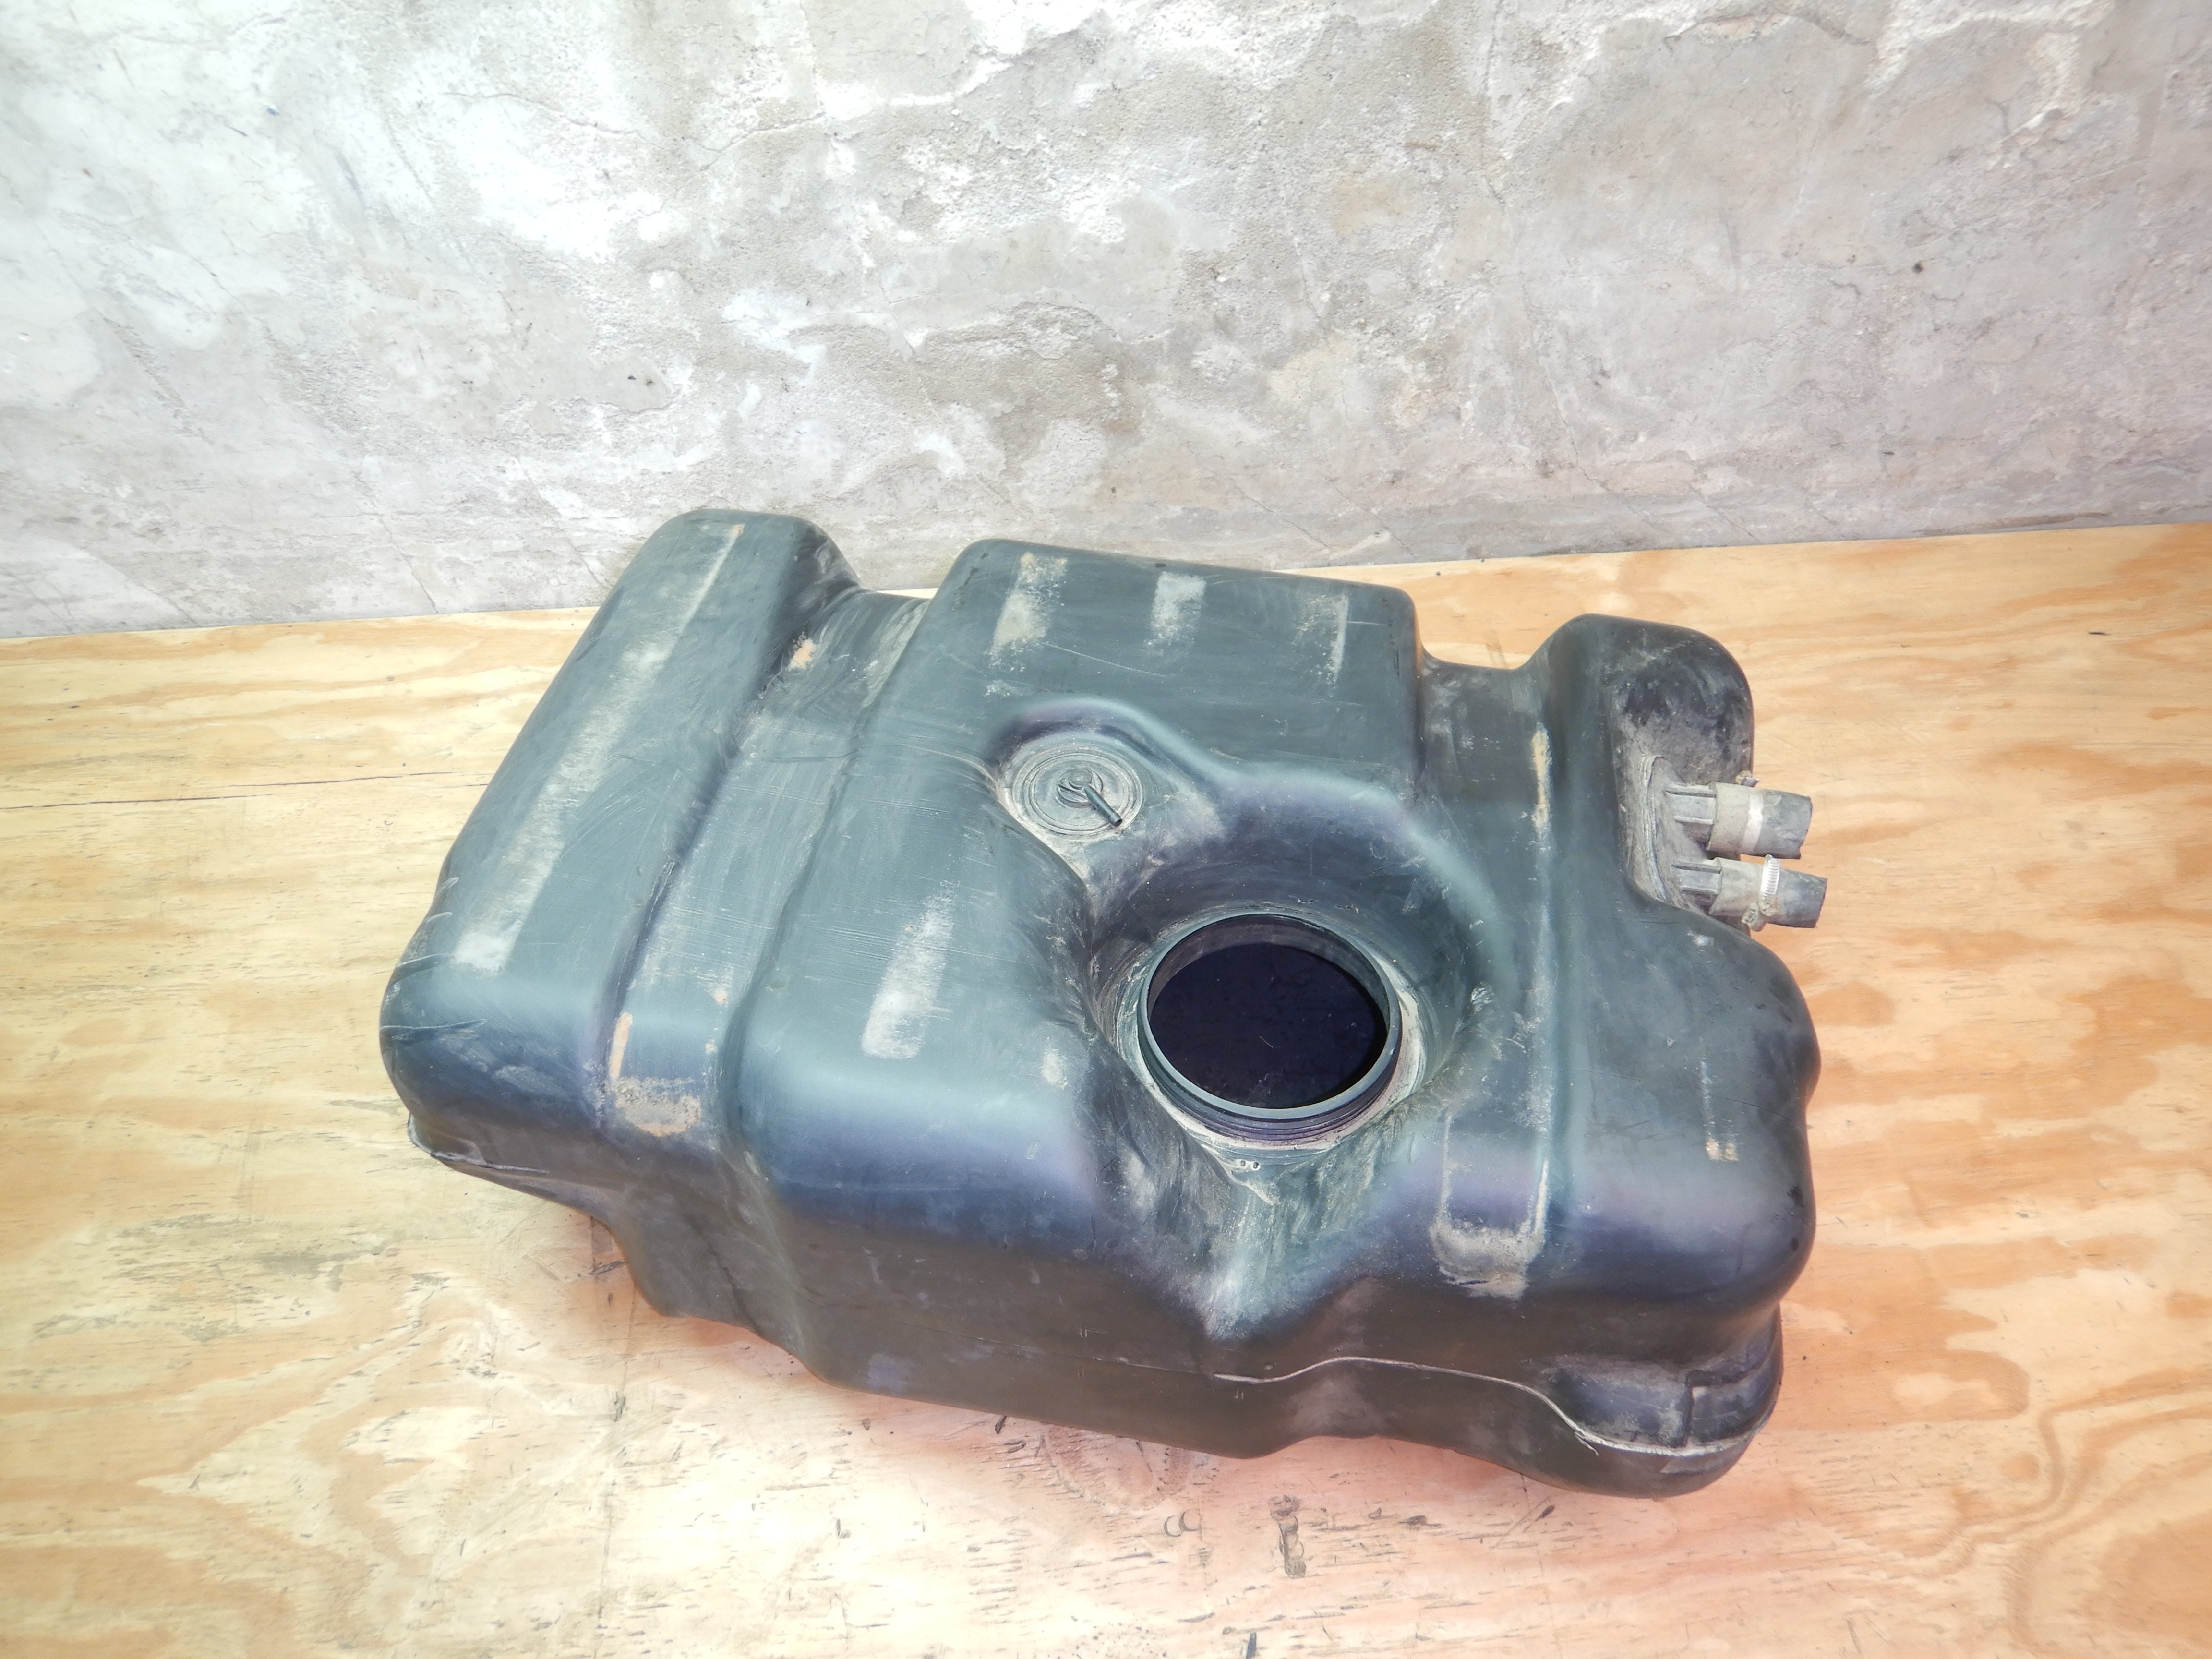 2004 jeep grand cherokee fuel tank removal